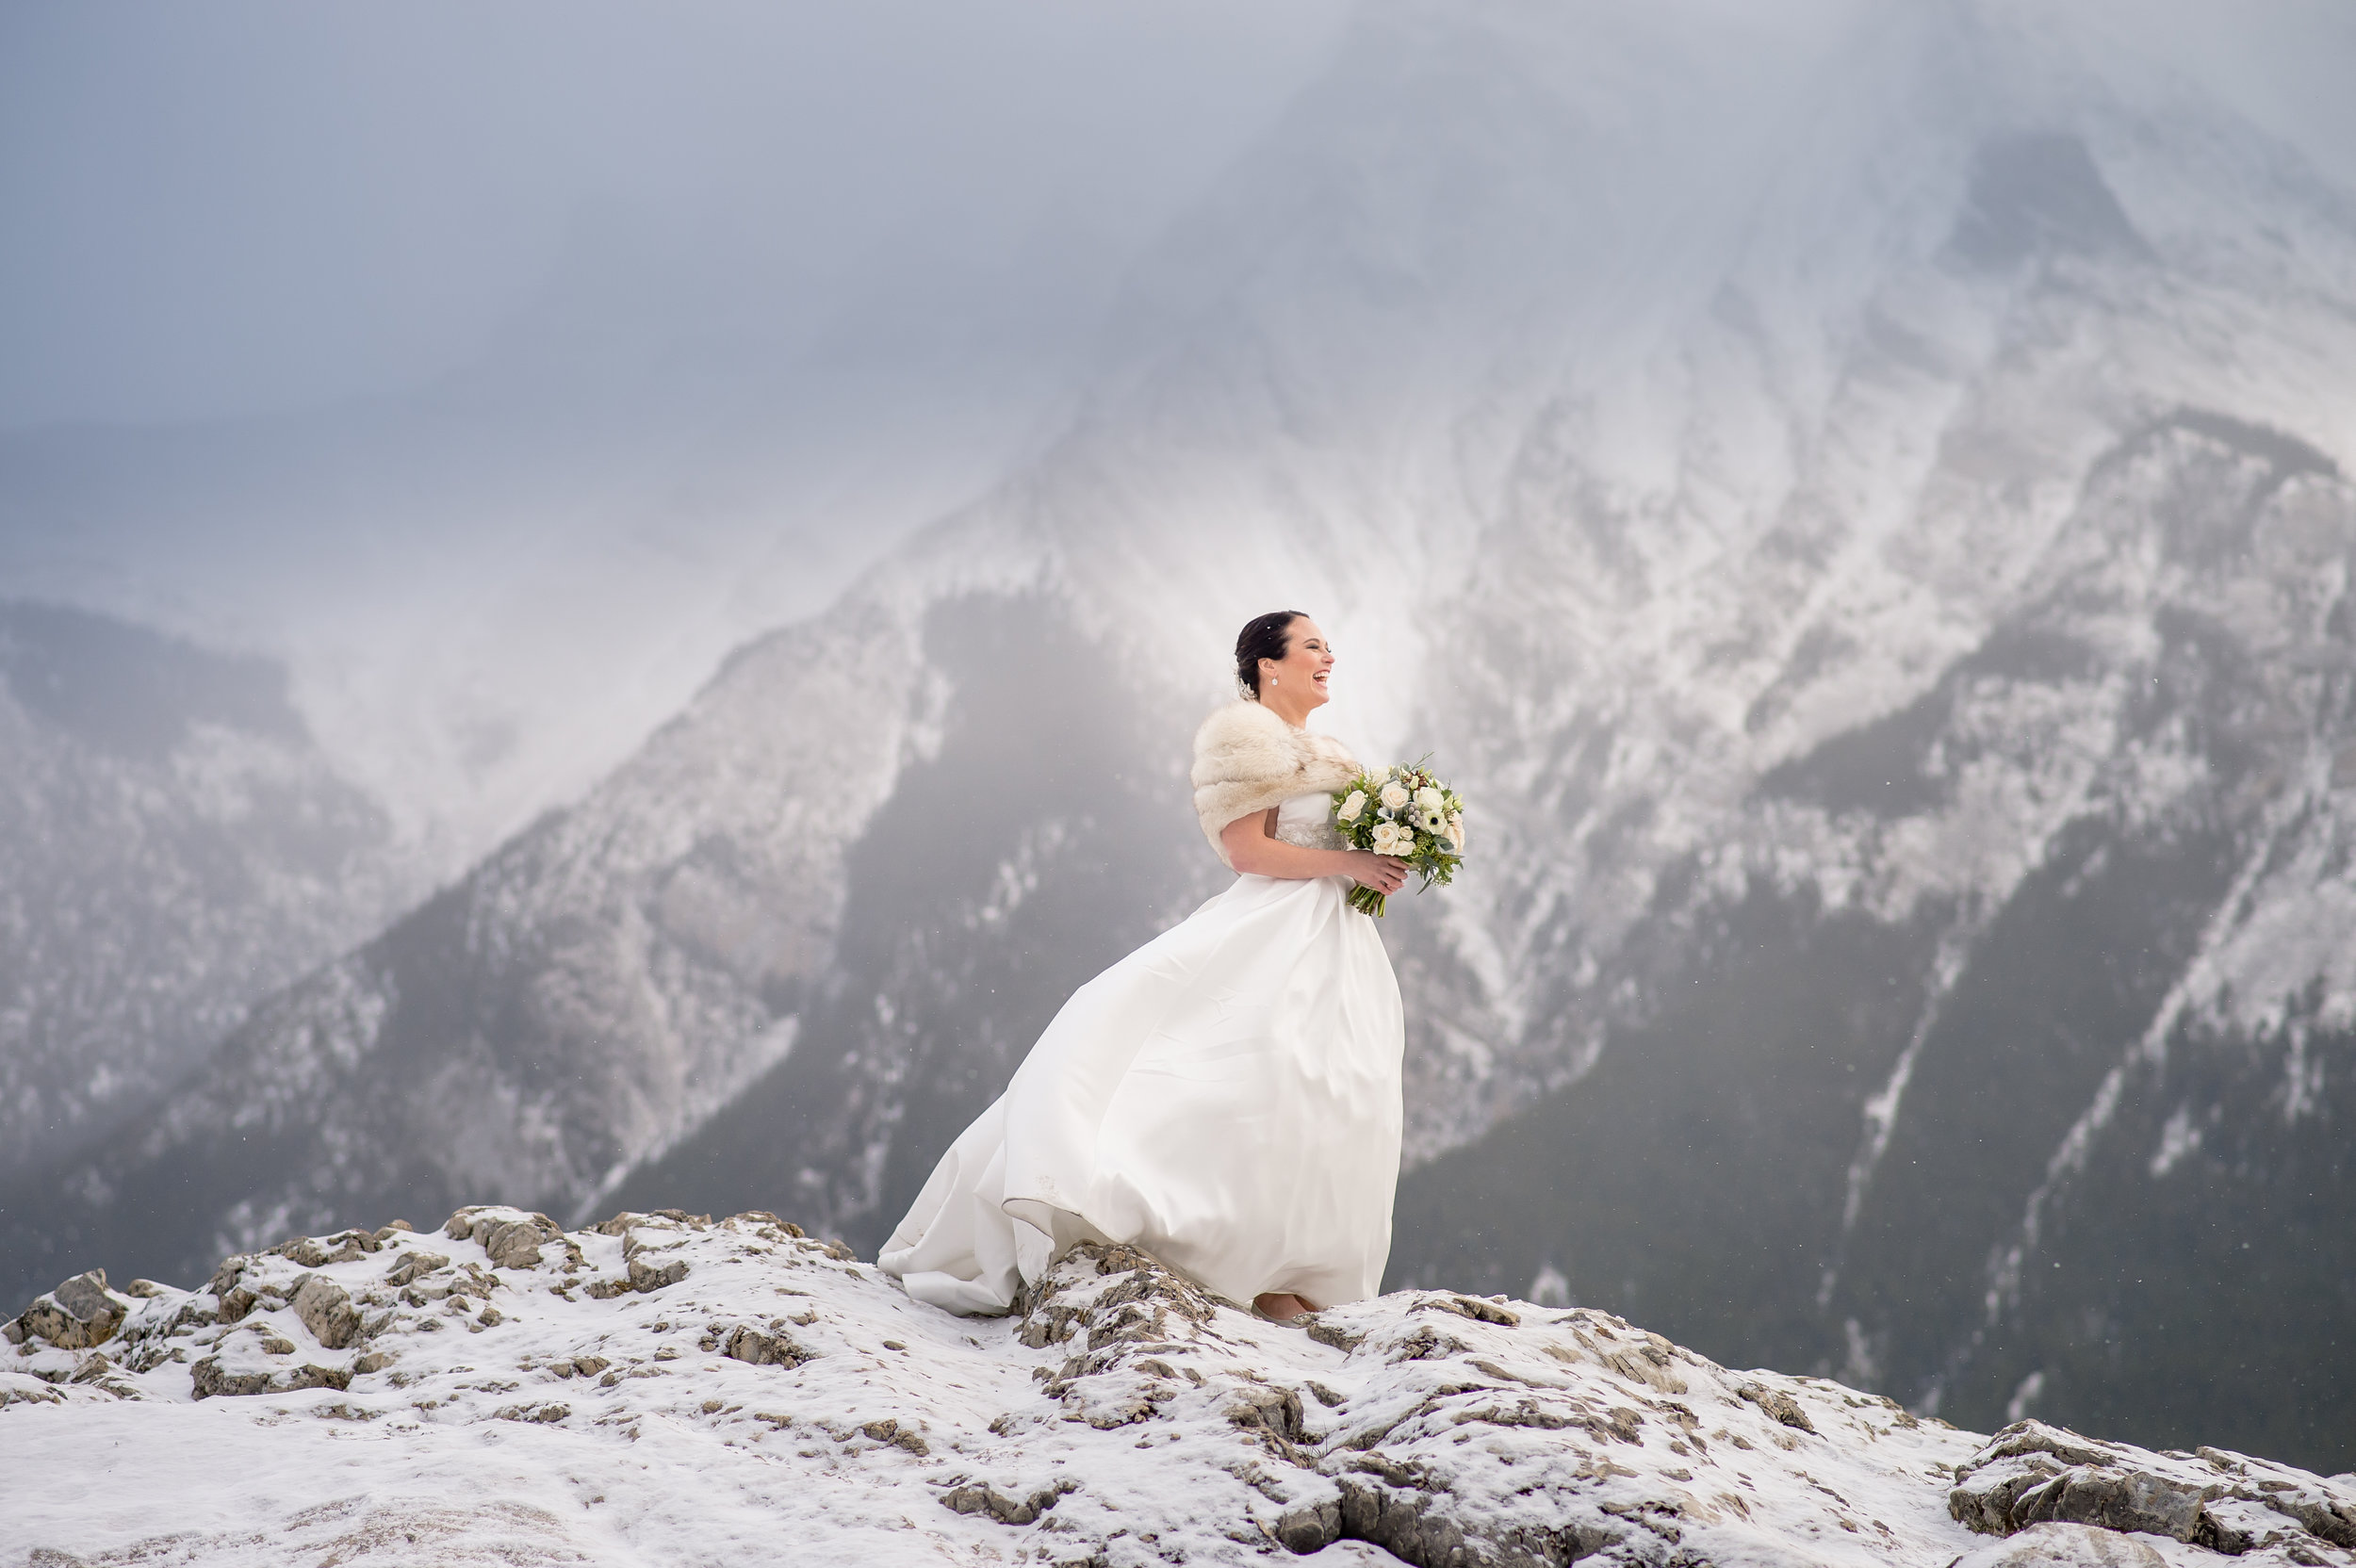  Winter wedding in Banff, Canada | Anne Barge Harlequin gown from Little White Dress in Denver, Colorado |&nbsp; Orange Girl Photography  